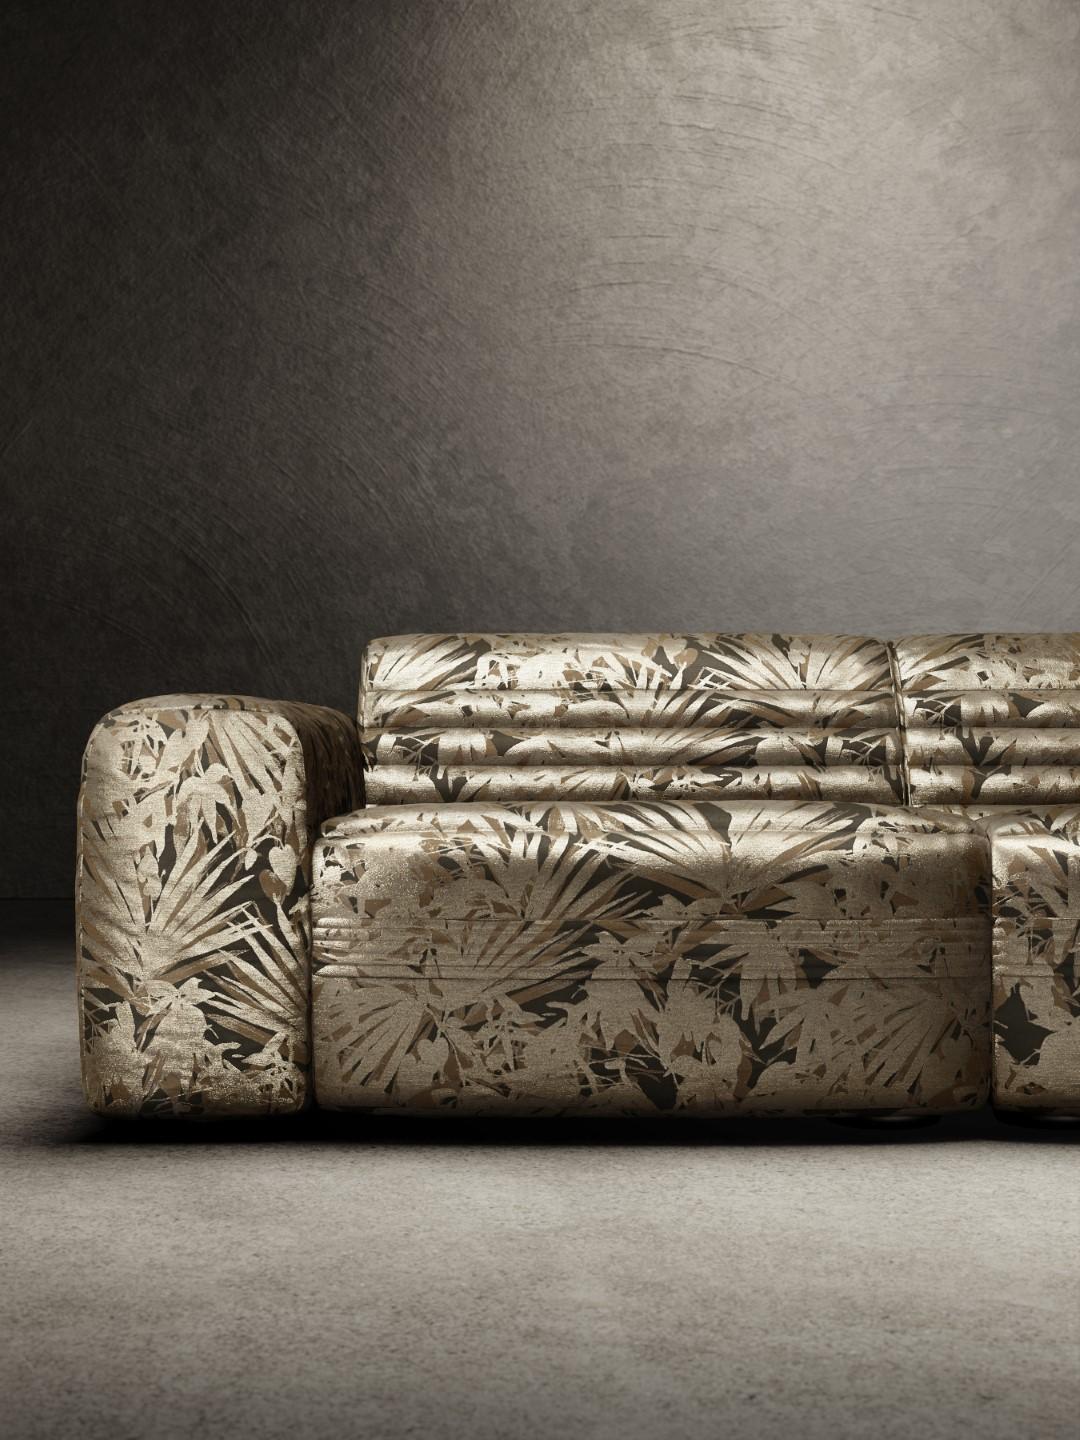 Embroidered Vicious Modular Sofa Java Fabric (shiny and matte effect) For Sale